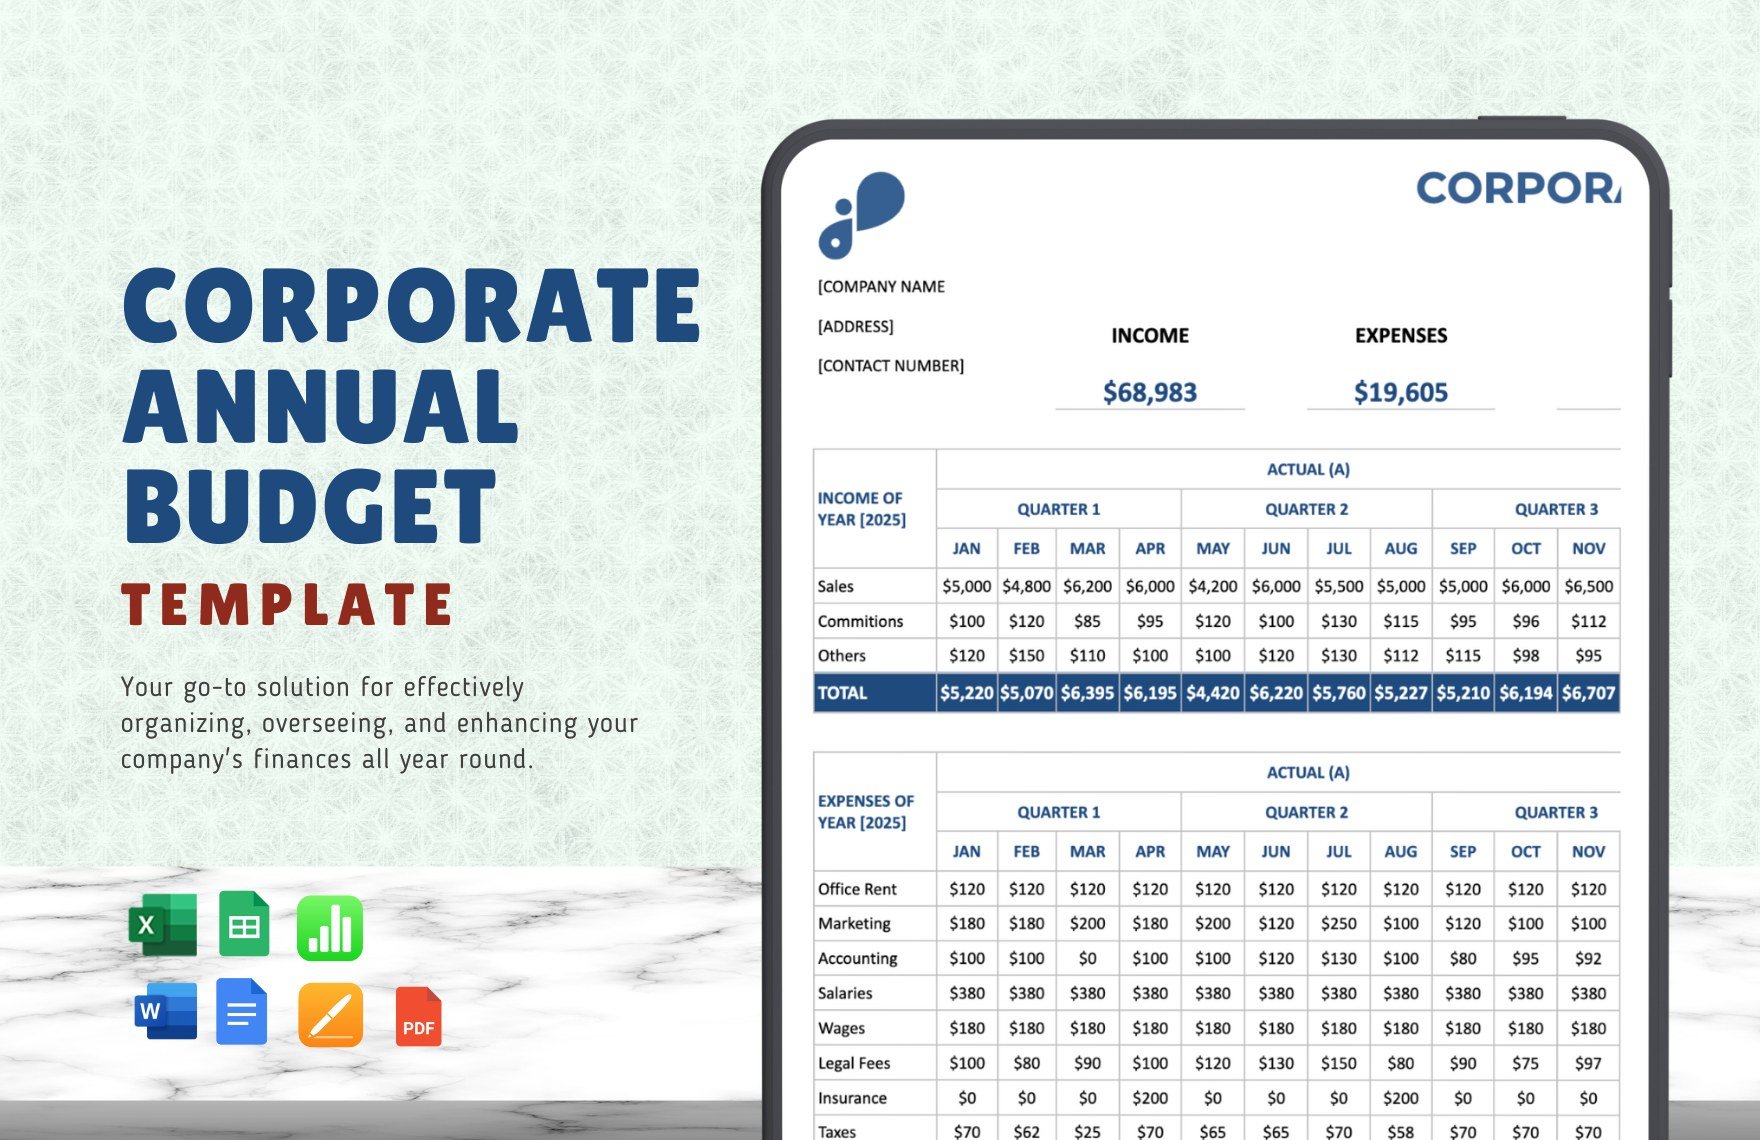 Corporate Annual Budget Template in Word, Google Docs, Excel, PDF, Google Sheets, Apple Pages, Apple Numbers